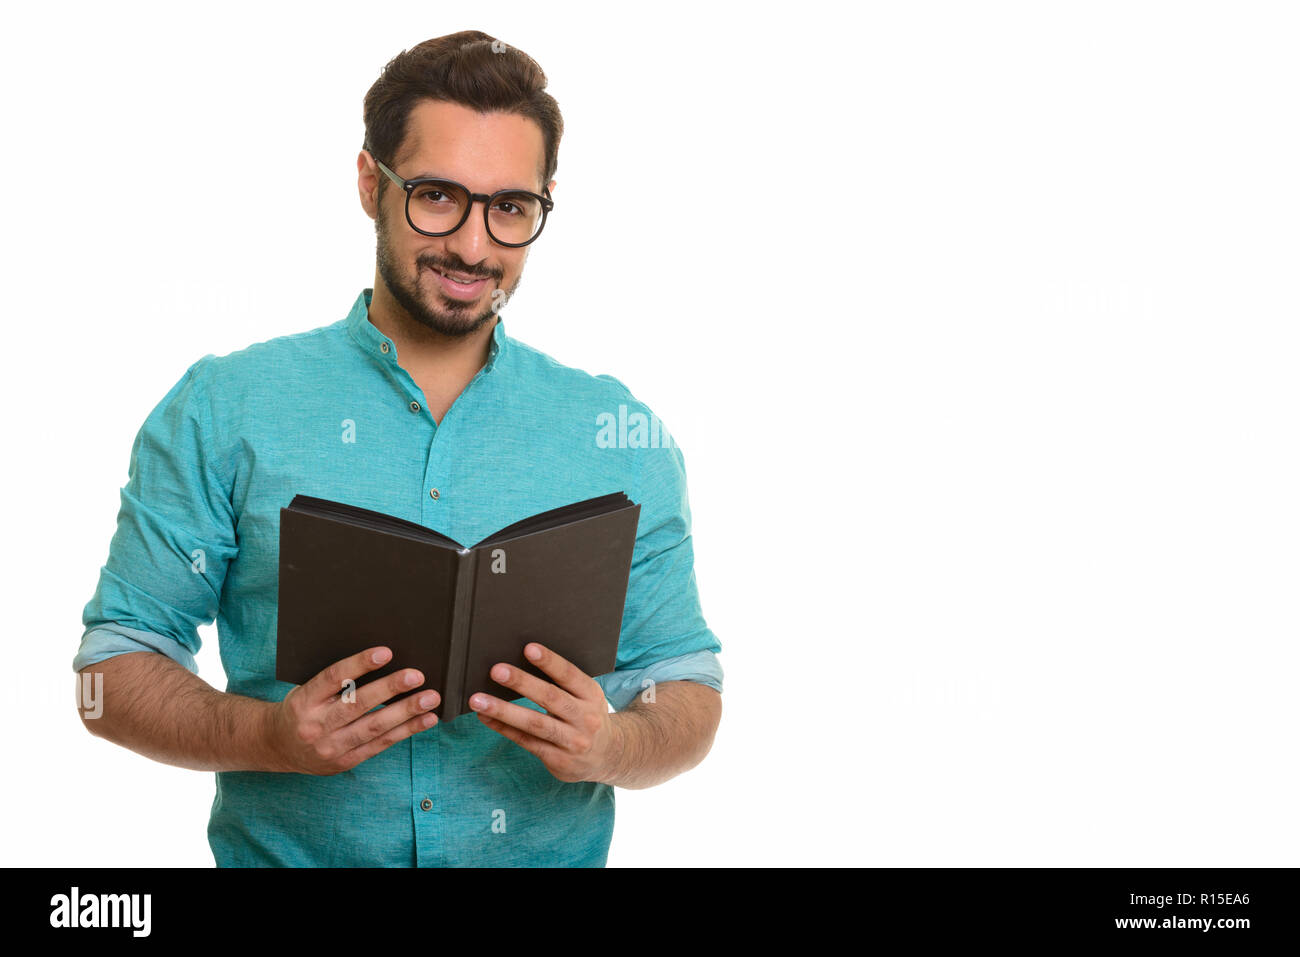 Portrait of young happy Indian man holding book Stock Photo